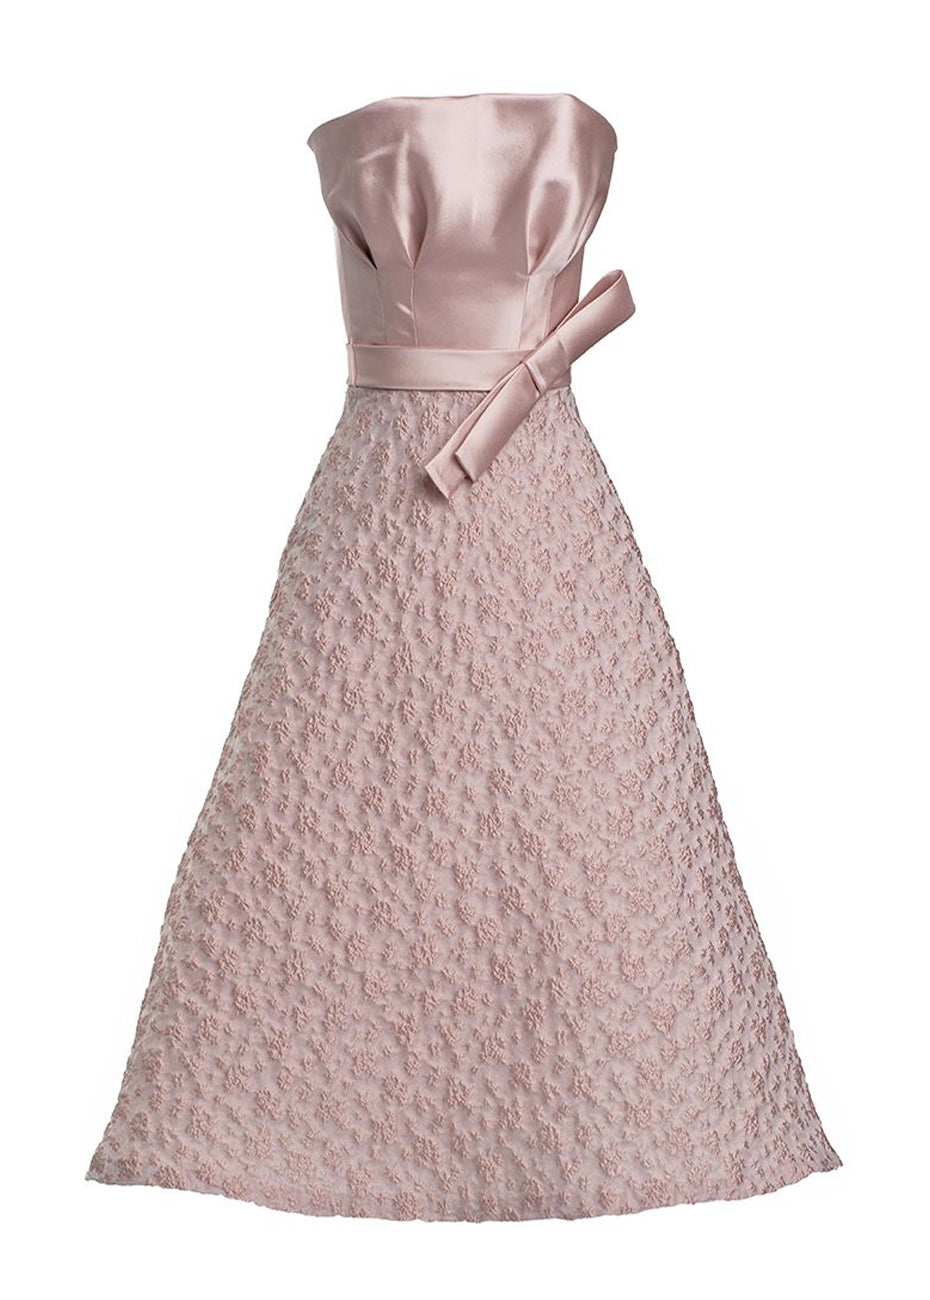 Strapless Gown with Bow - Pale Pink Pink Tartan